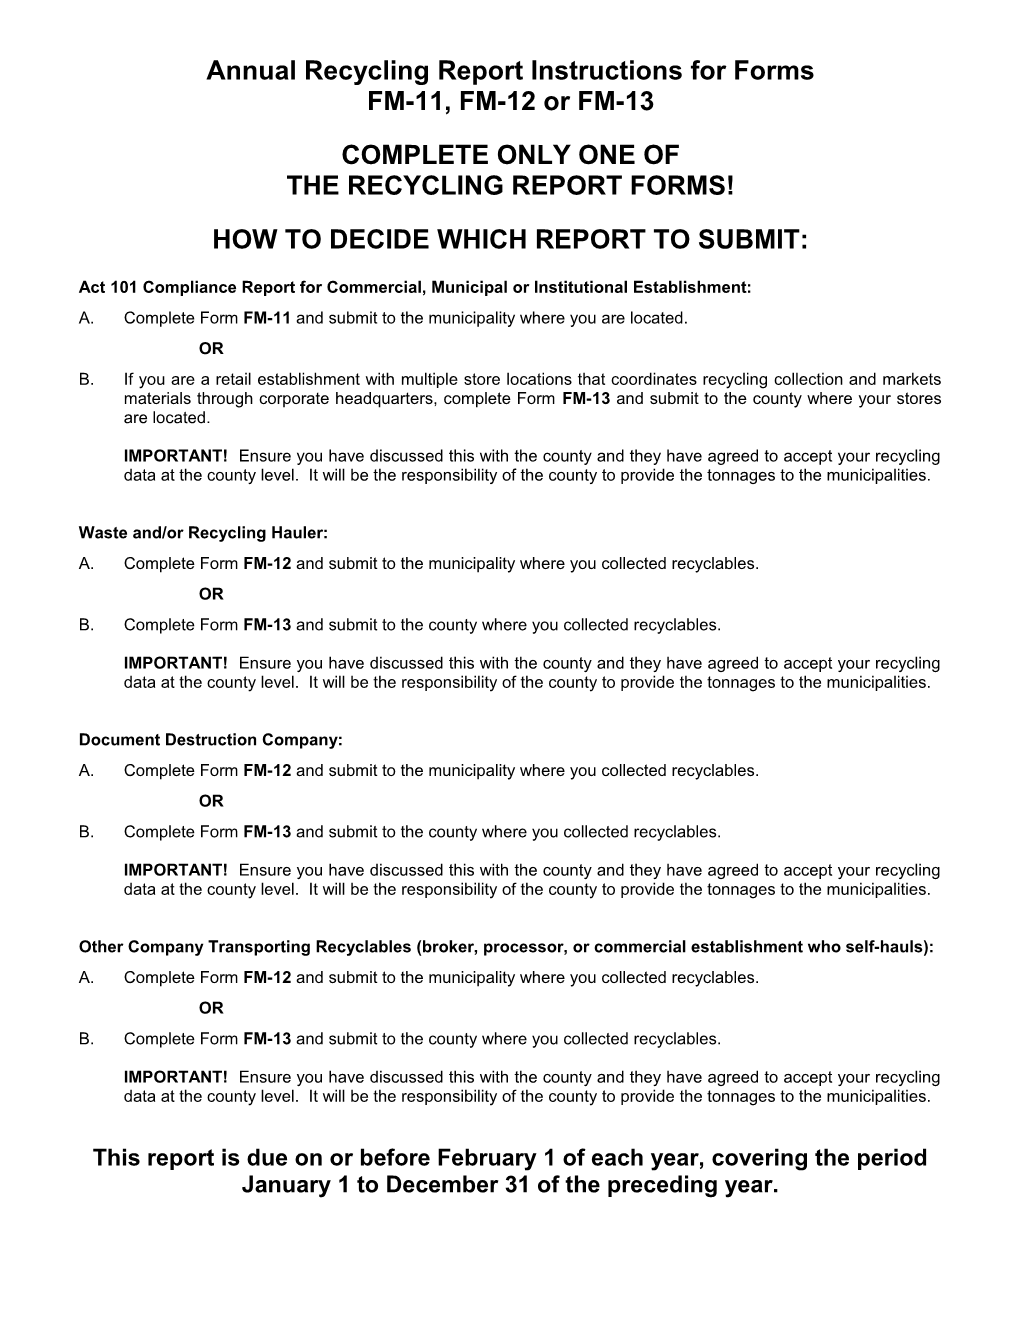 Annual Recycling Report Instructions for Forms